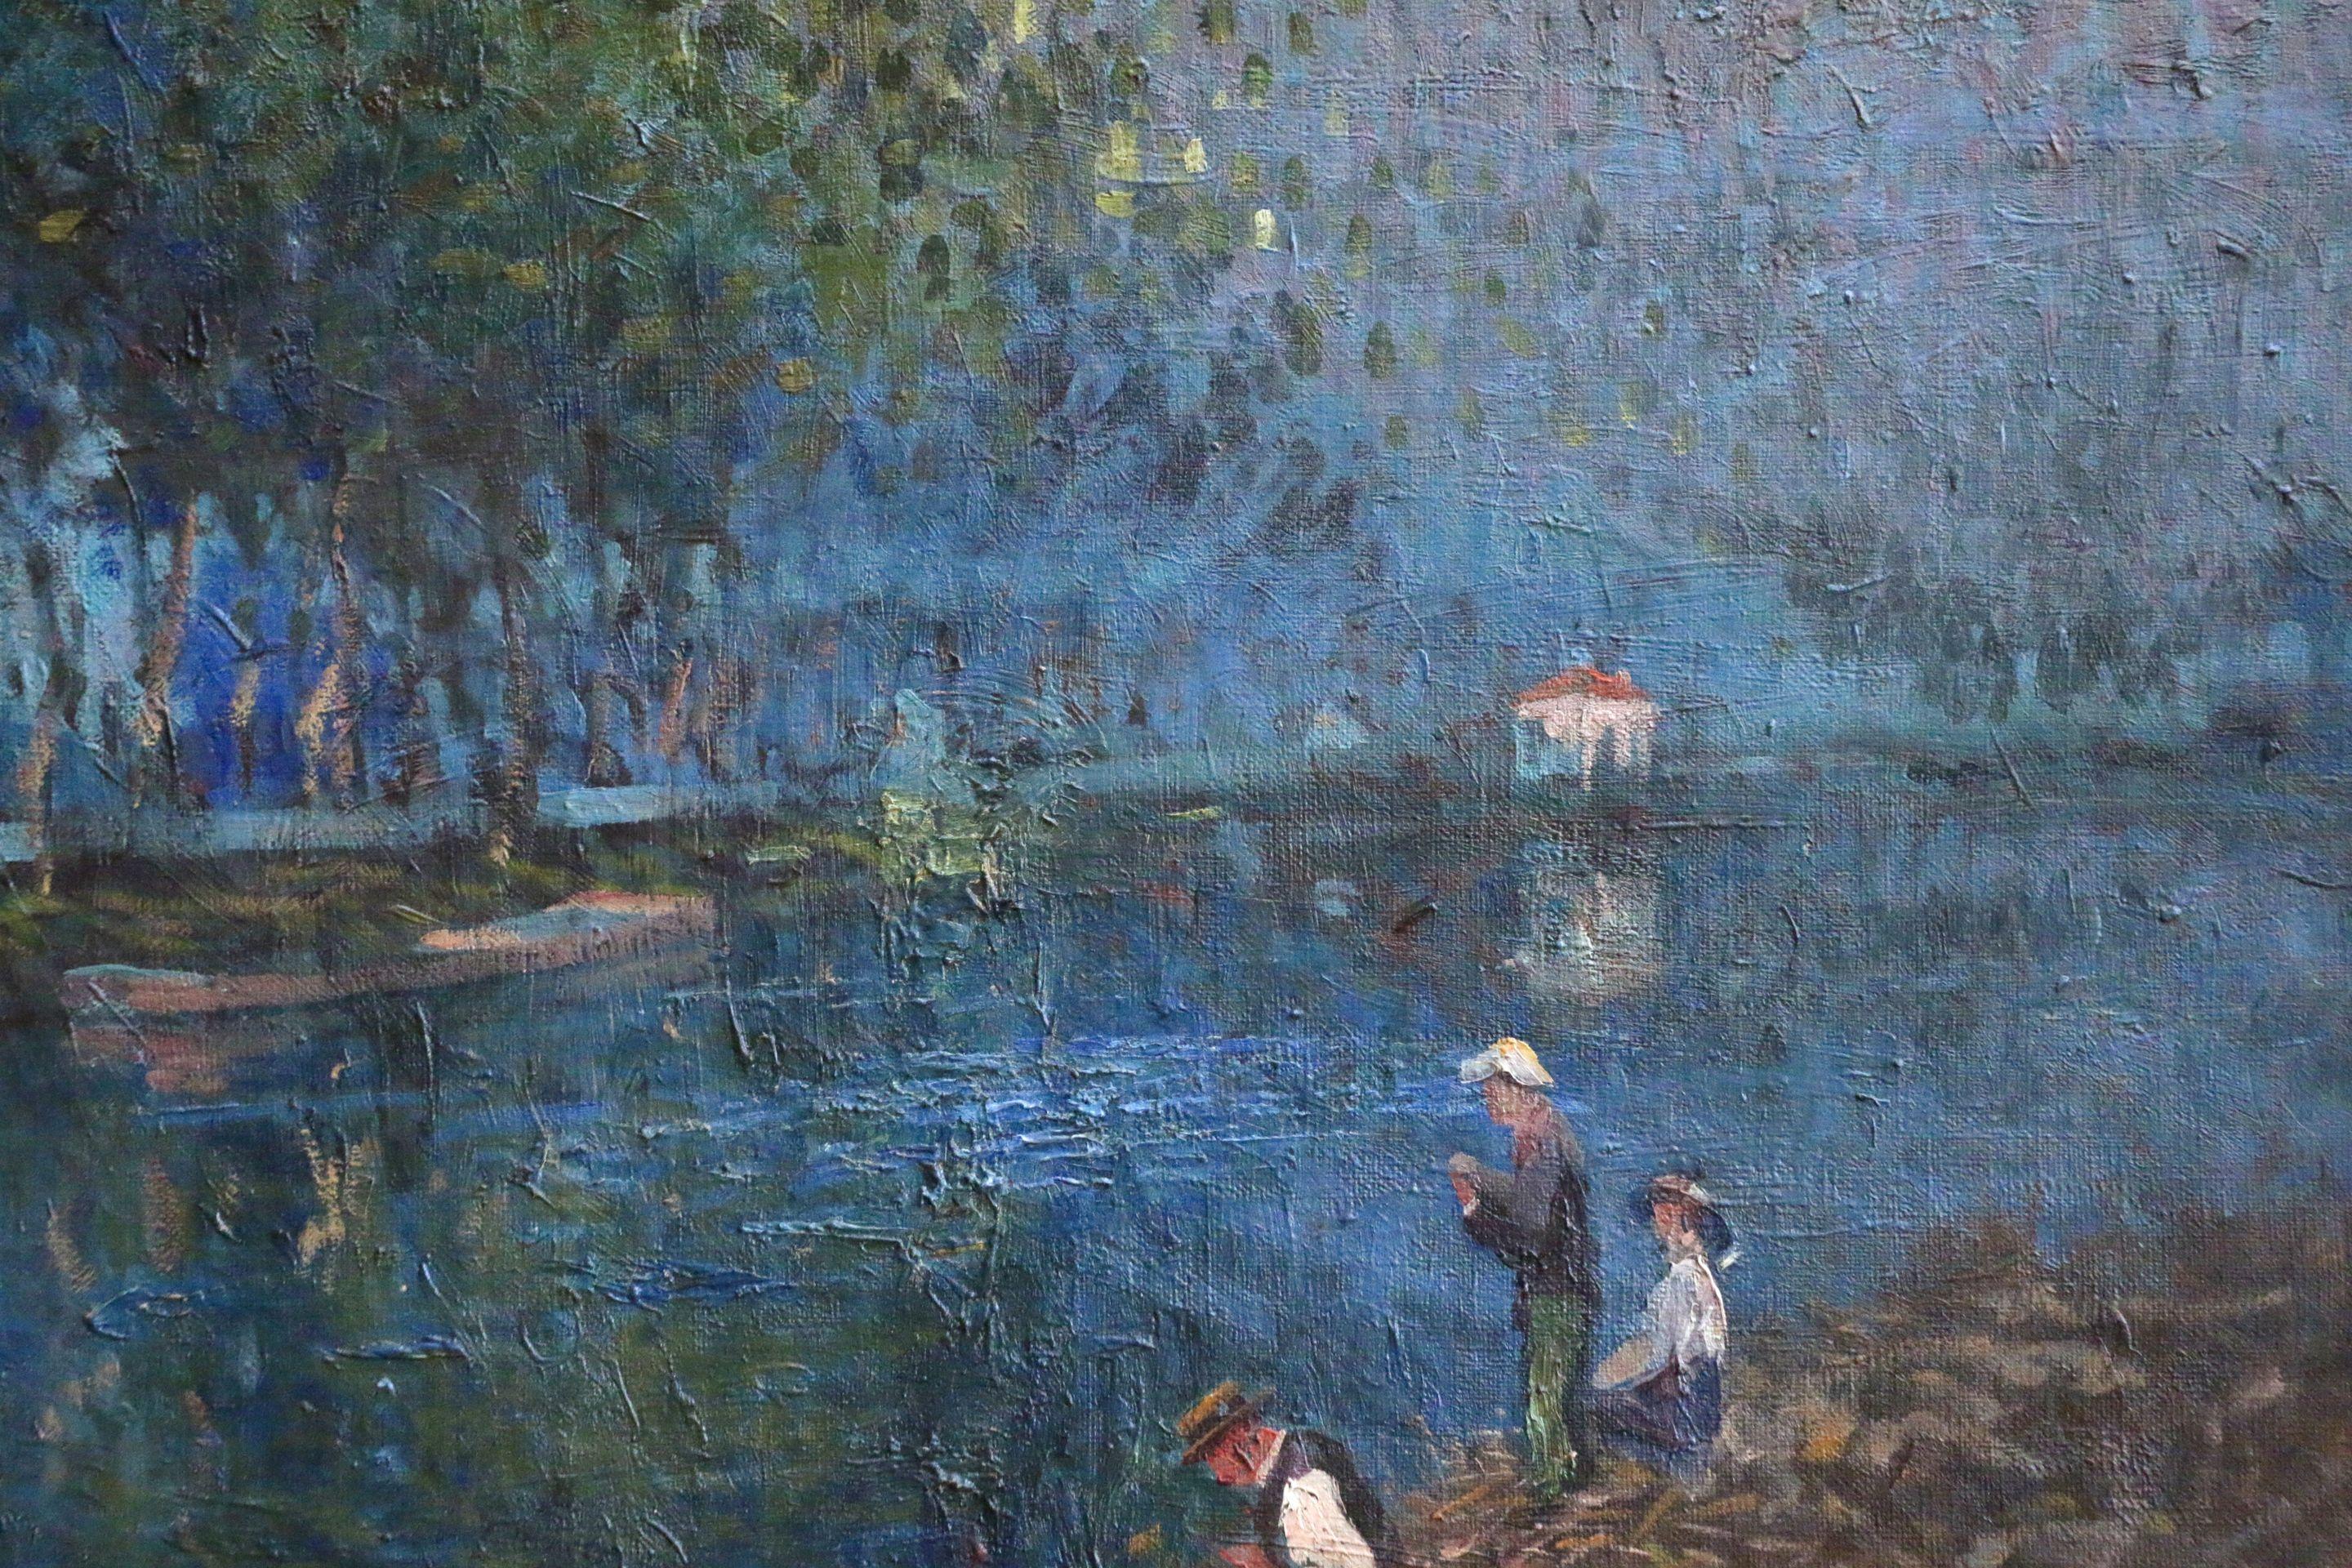 A beautifully painted and wonderfully coloured piece by Elie Anatole Pavil depicting figures on the bank of a river which is lined with trees. Oil on canvas circa 1905. Signed lower right. Framed dimensions are 32 inches high by 37 inches